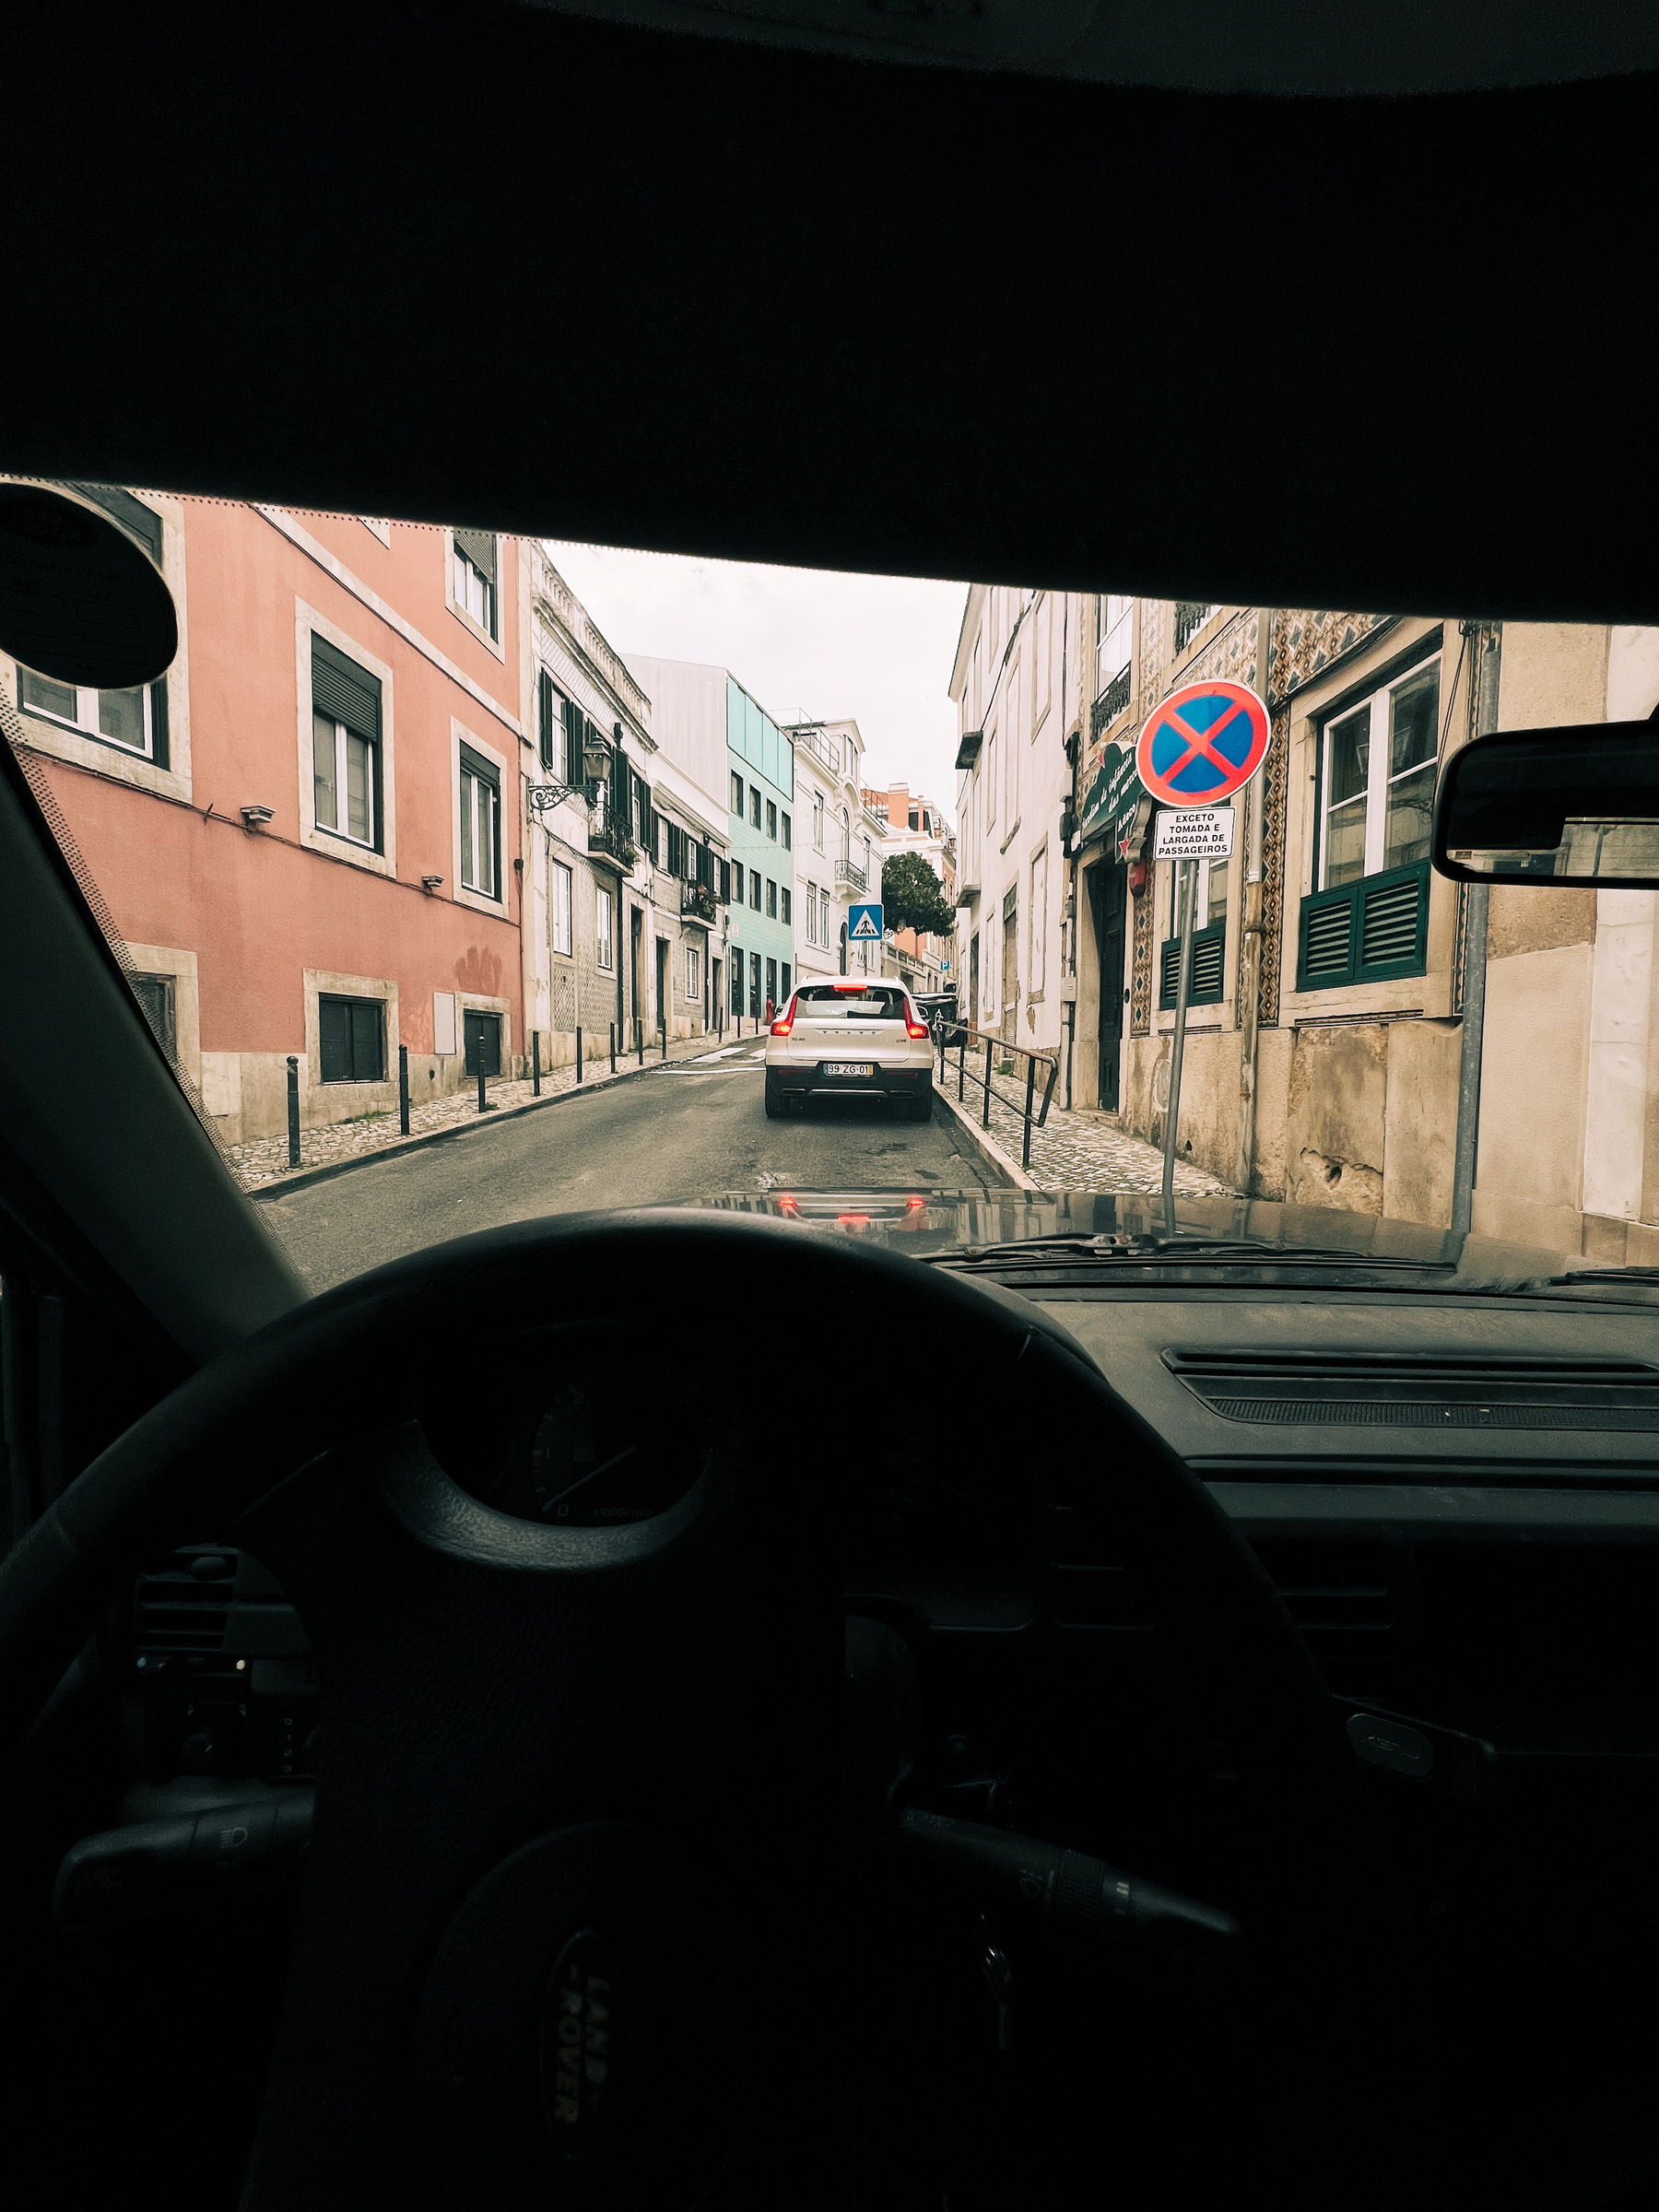 Parked on a side street. View from inside a car.